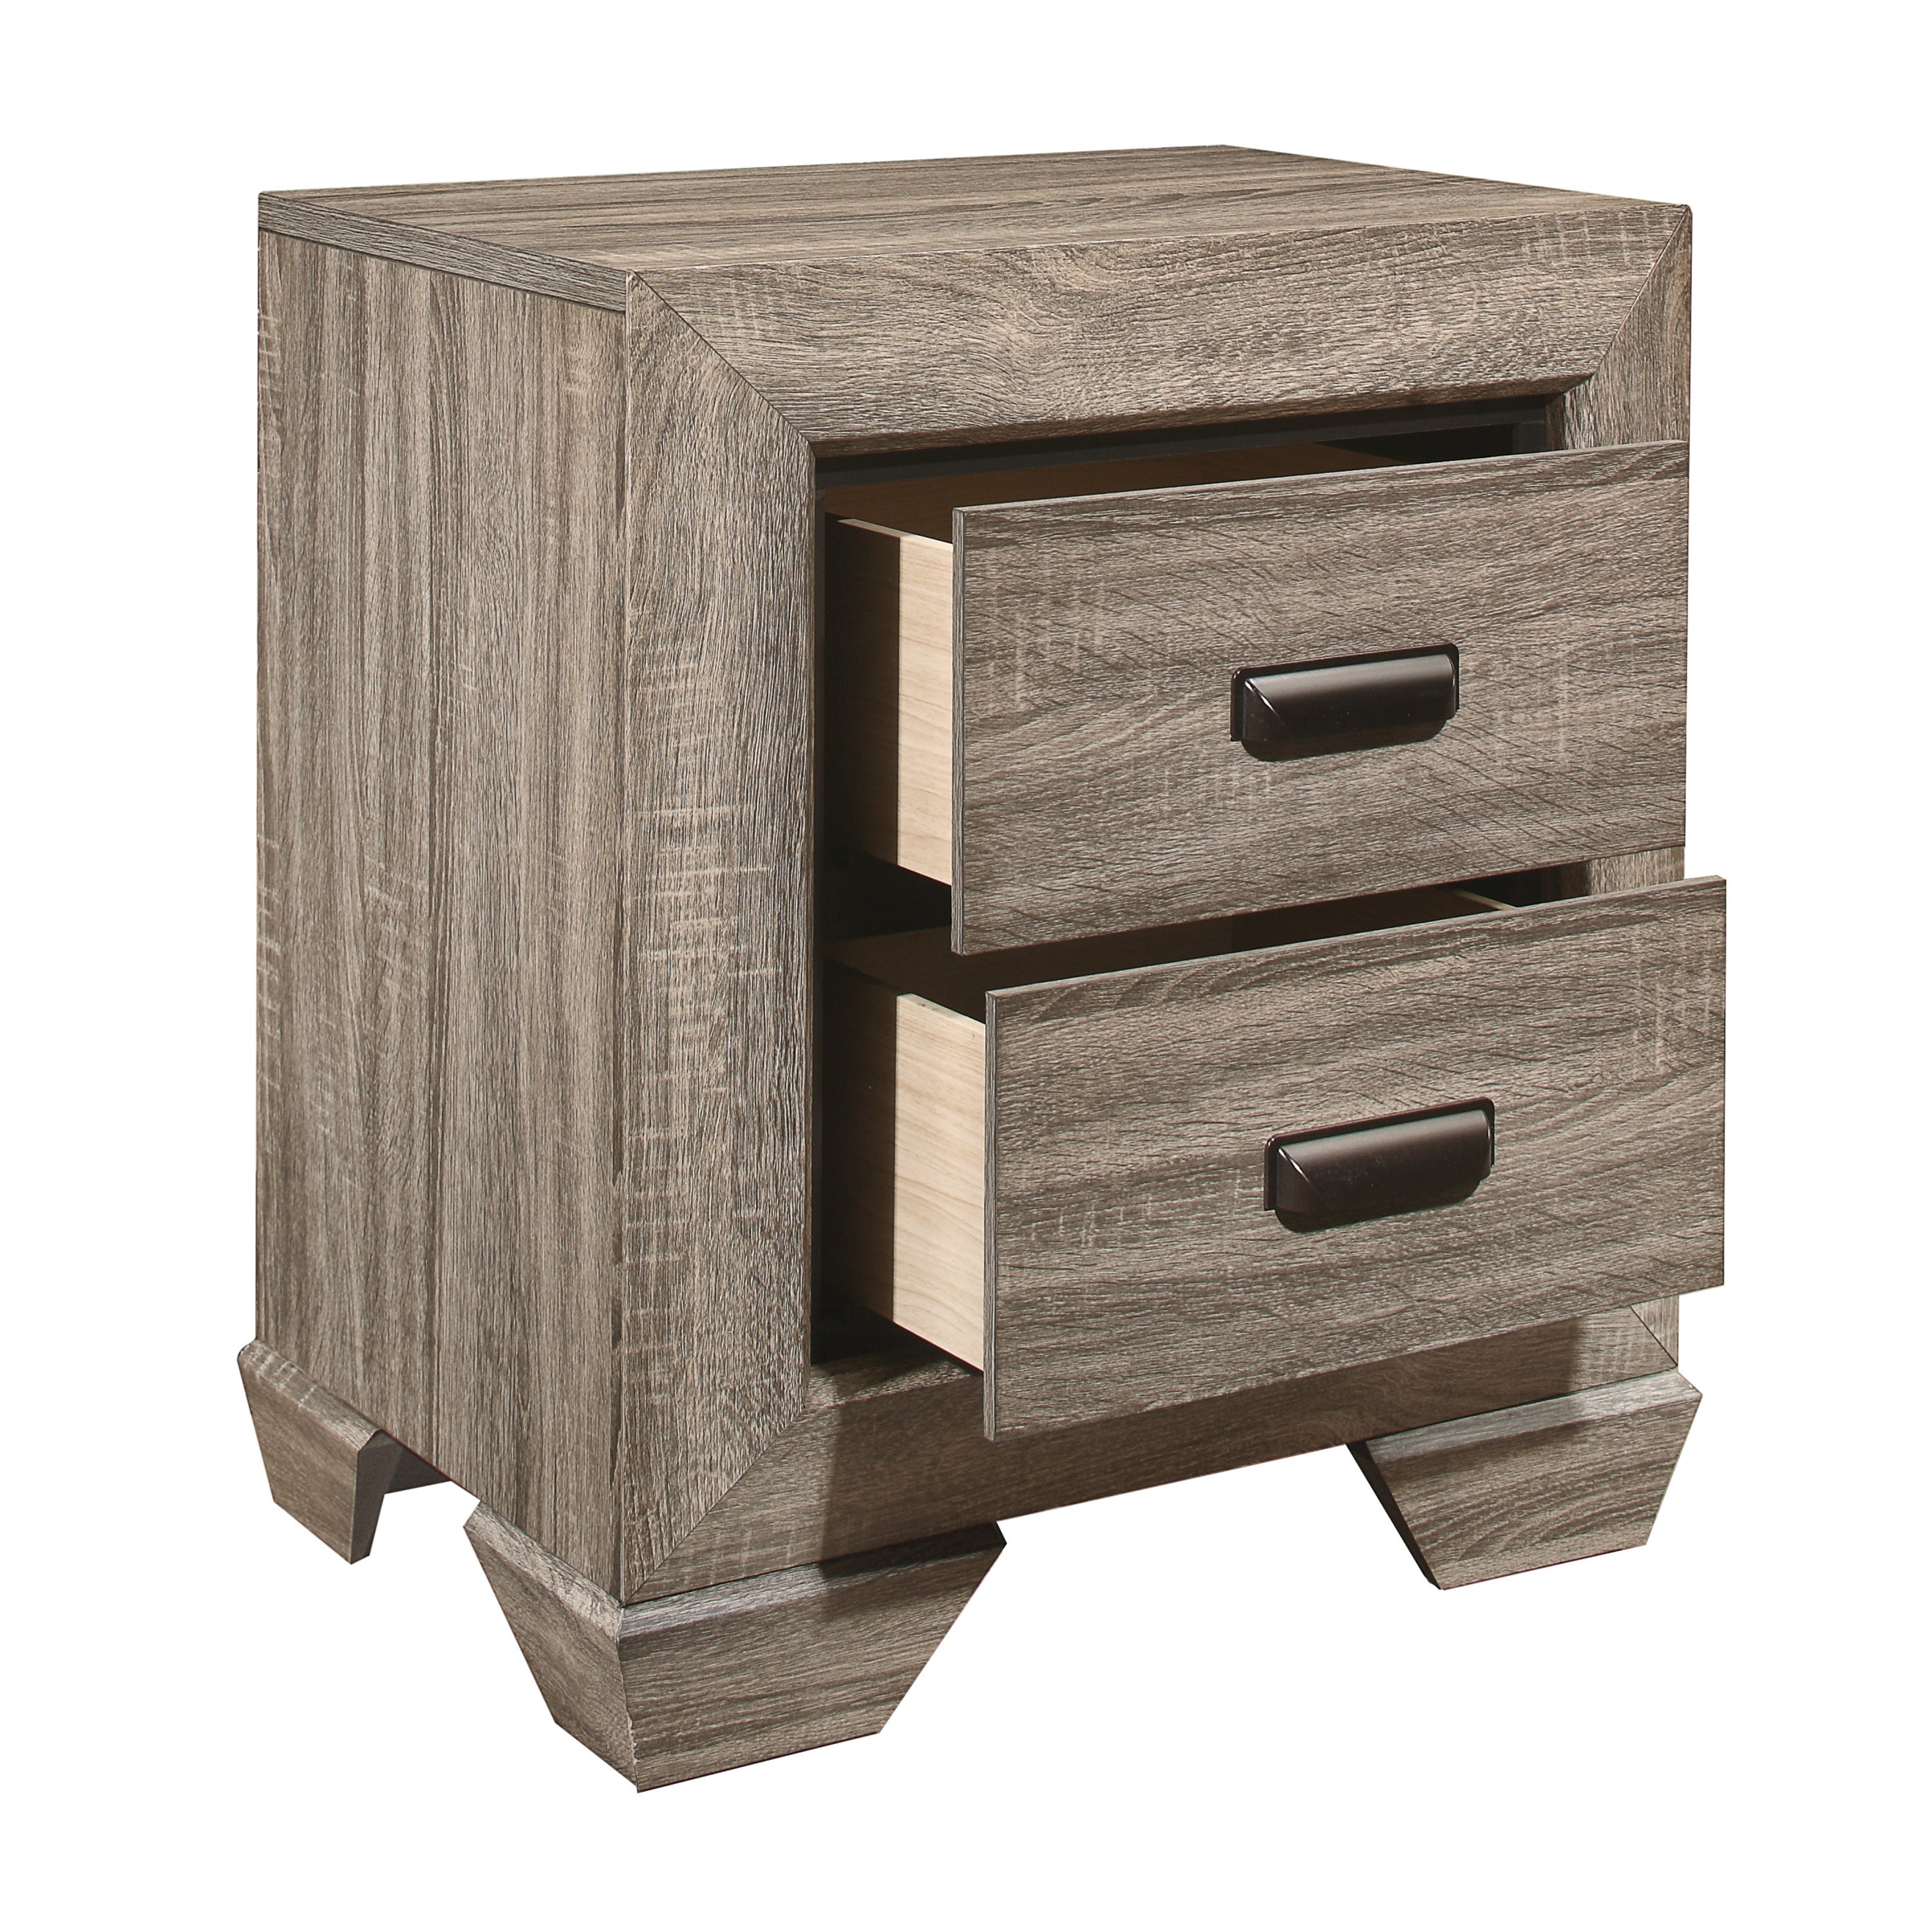 Flat Cup Pulls Two Dovetail Drawers Wooden Bed Side Table Bedroom Furniture